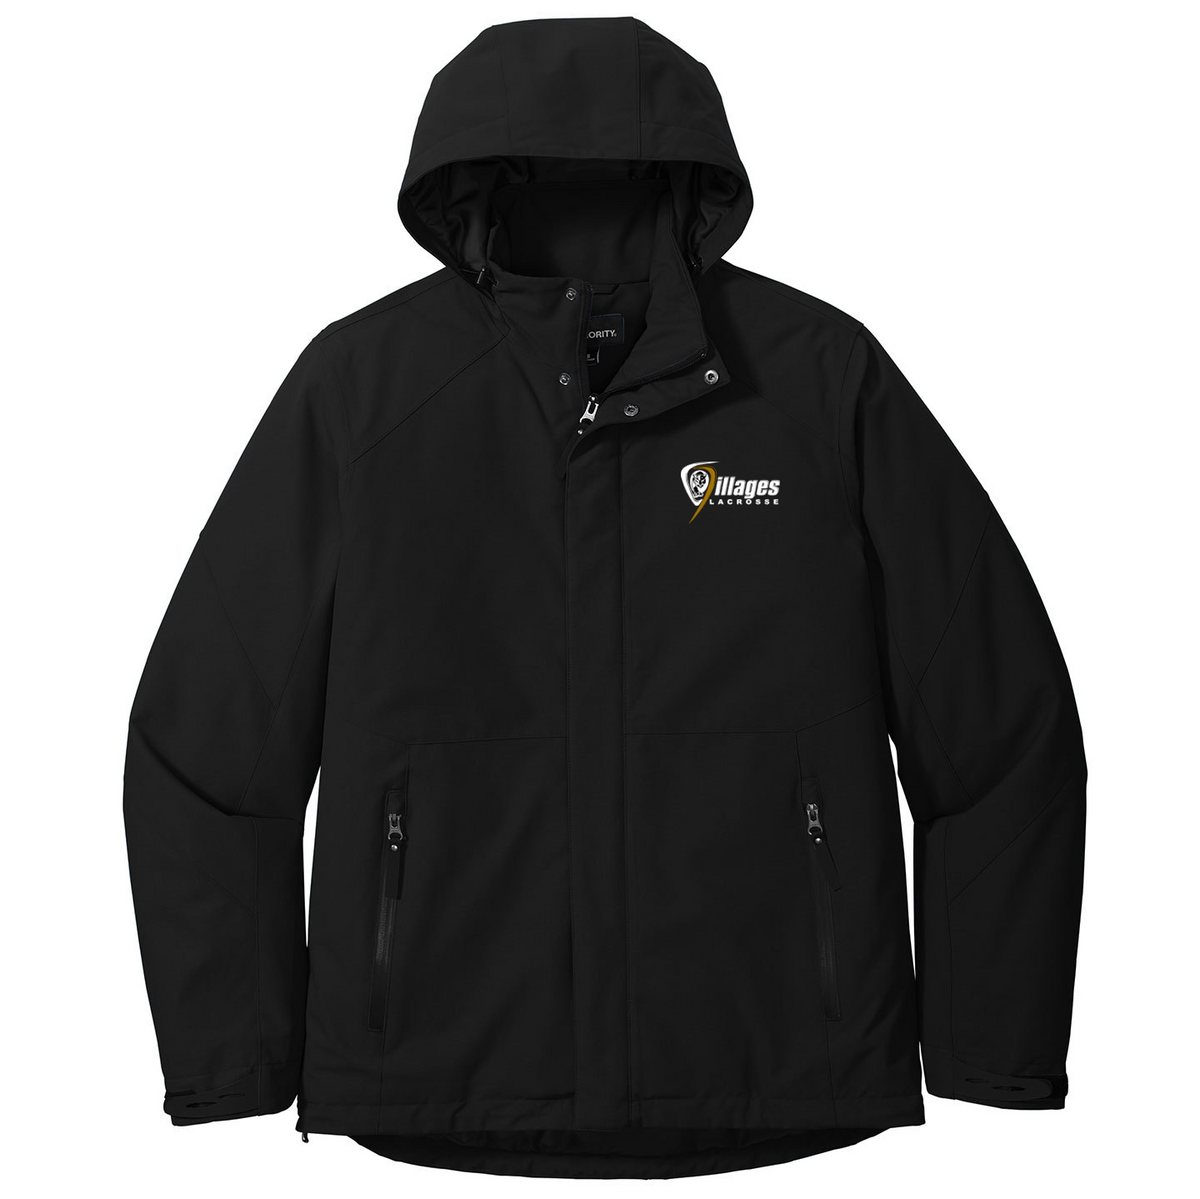 Villages Lacrosse Insulated Tech Jacket